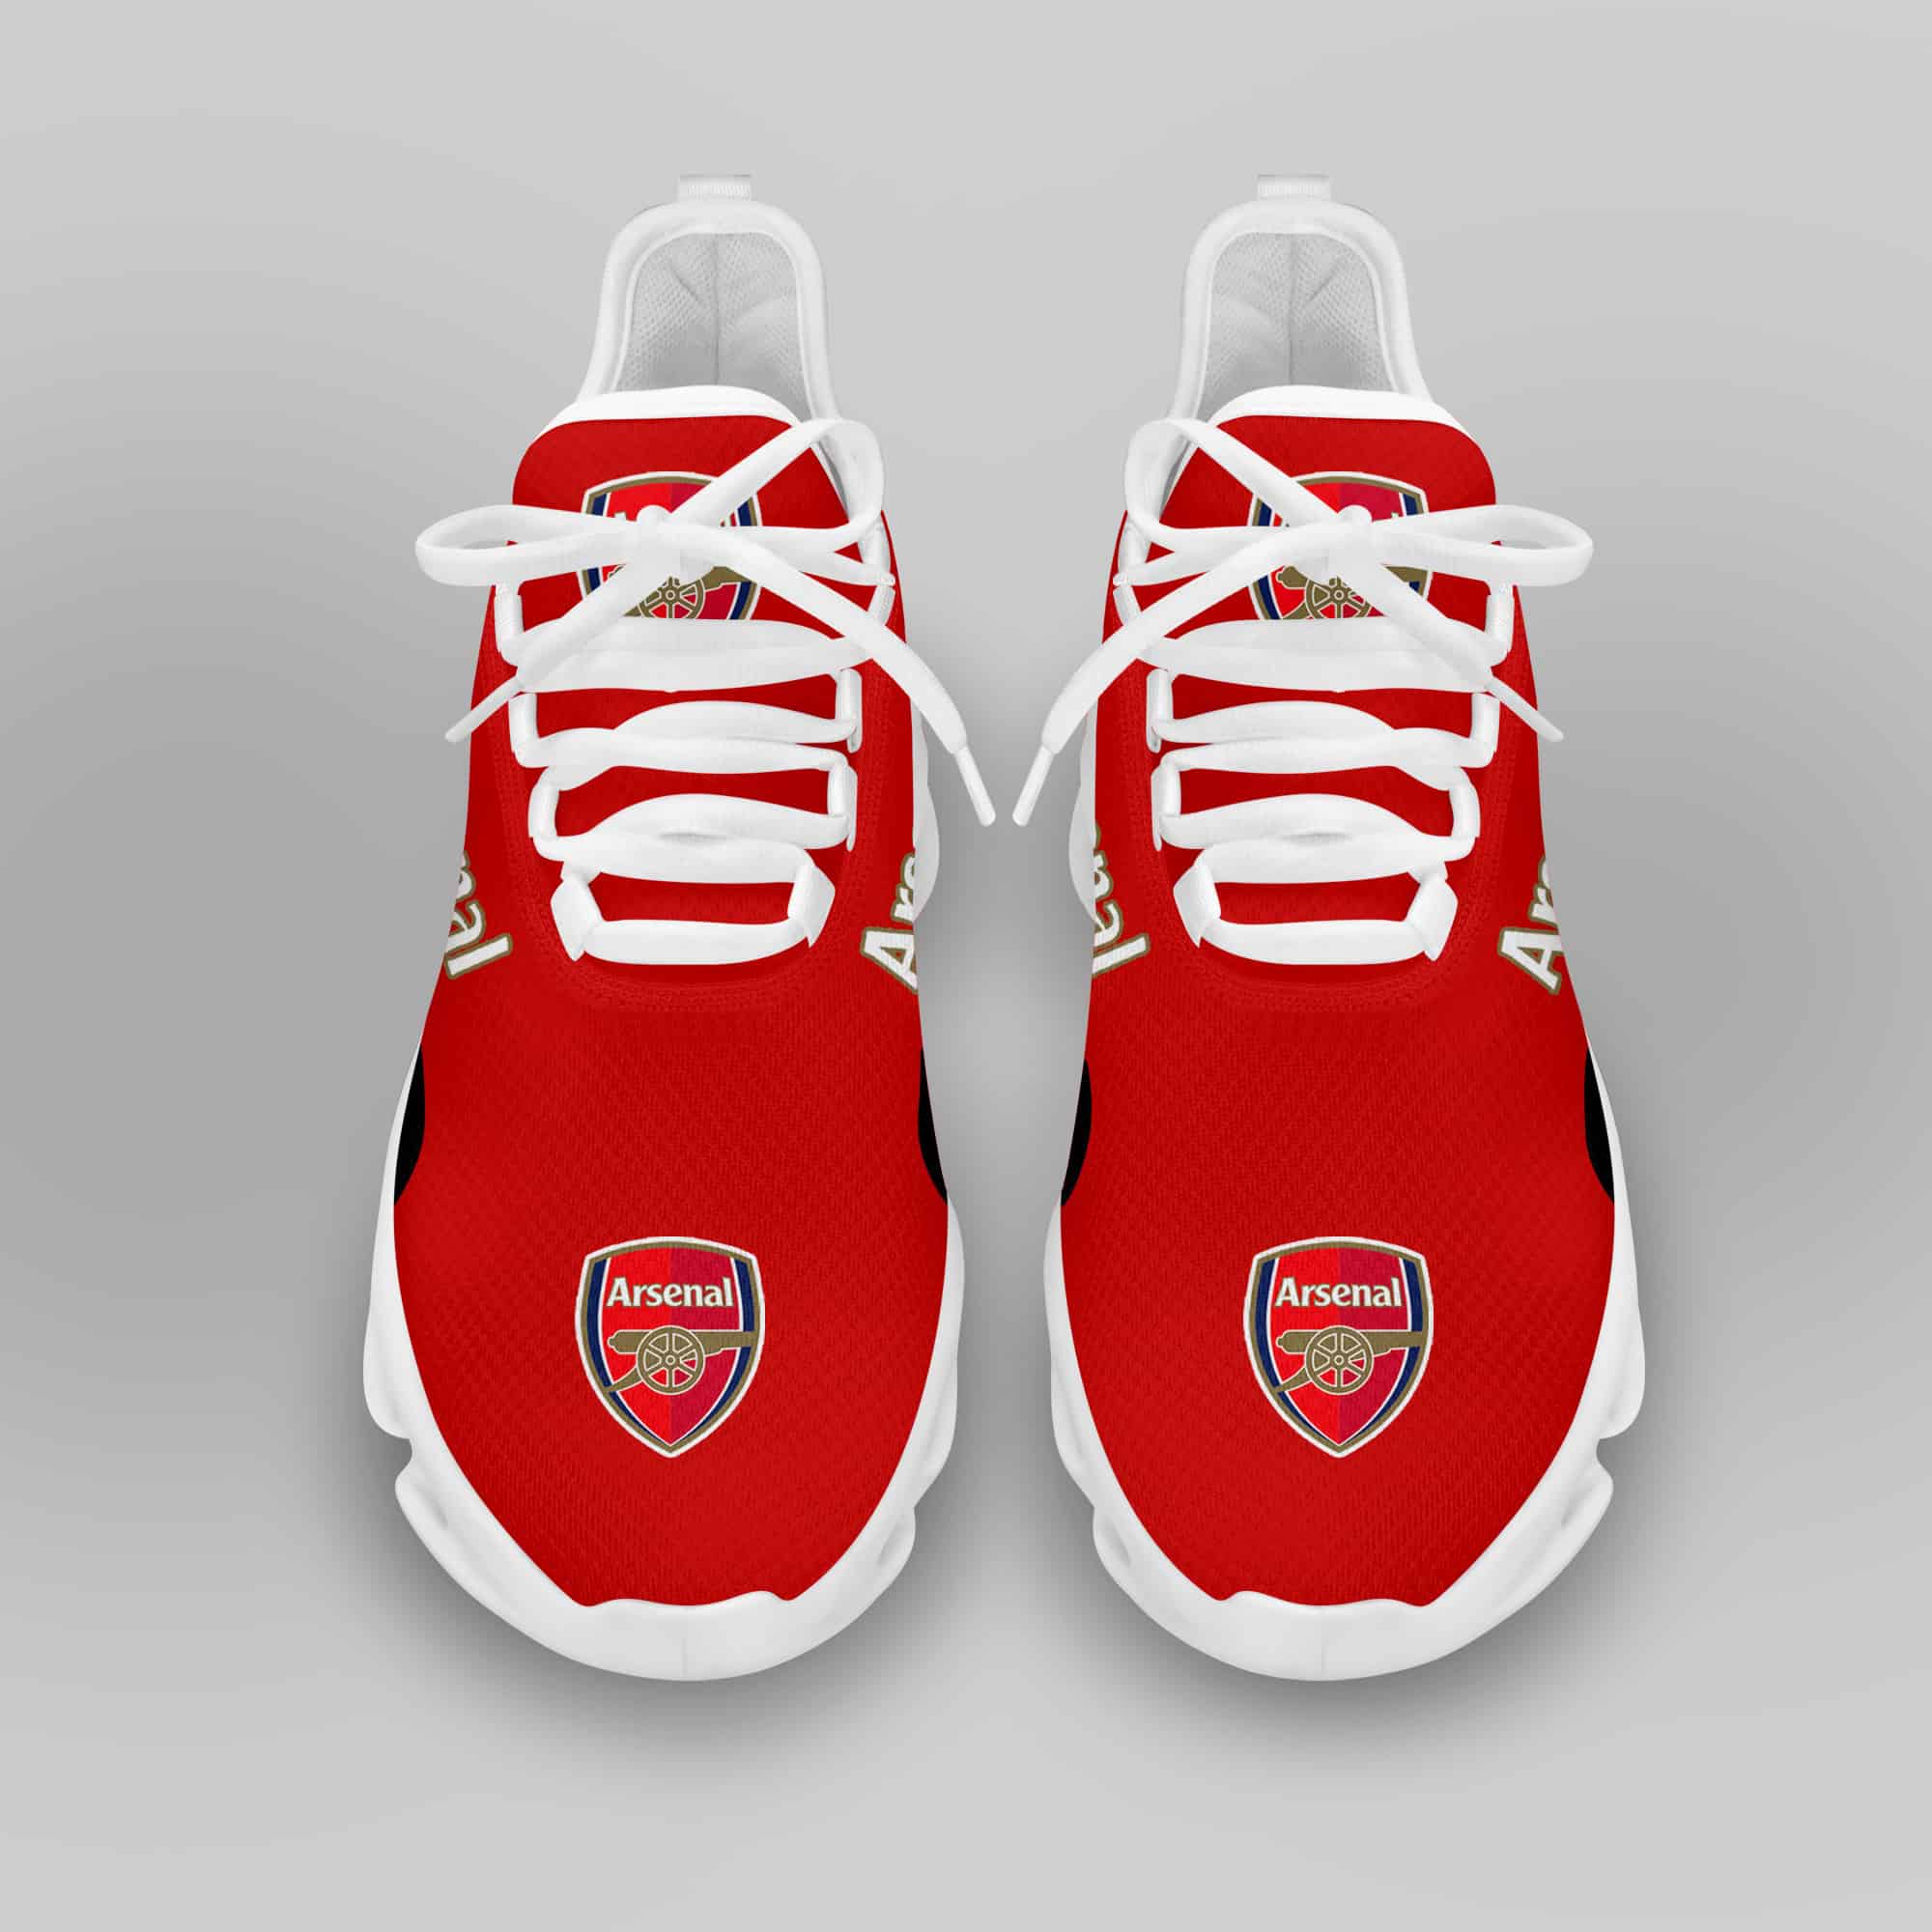 Arsenal Running Shoes Max Soul Shoes Sneakers Ver 1 3